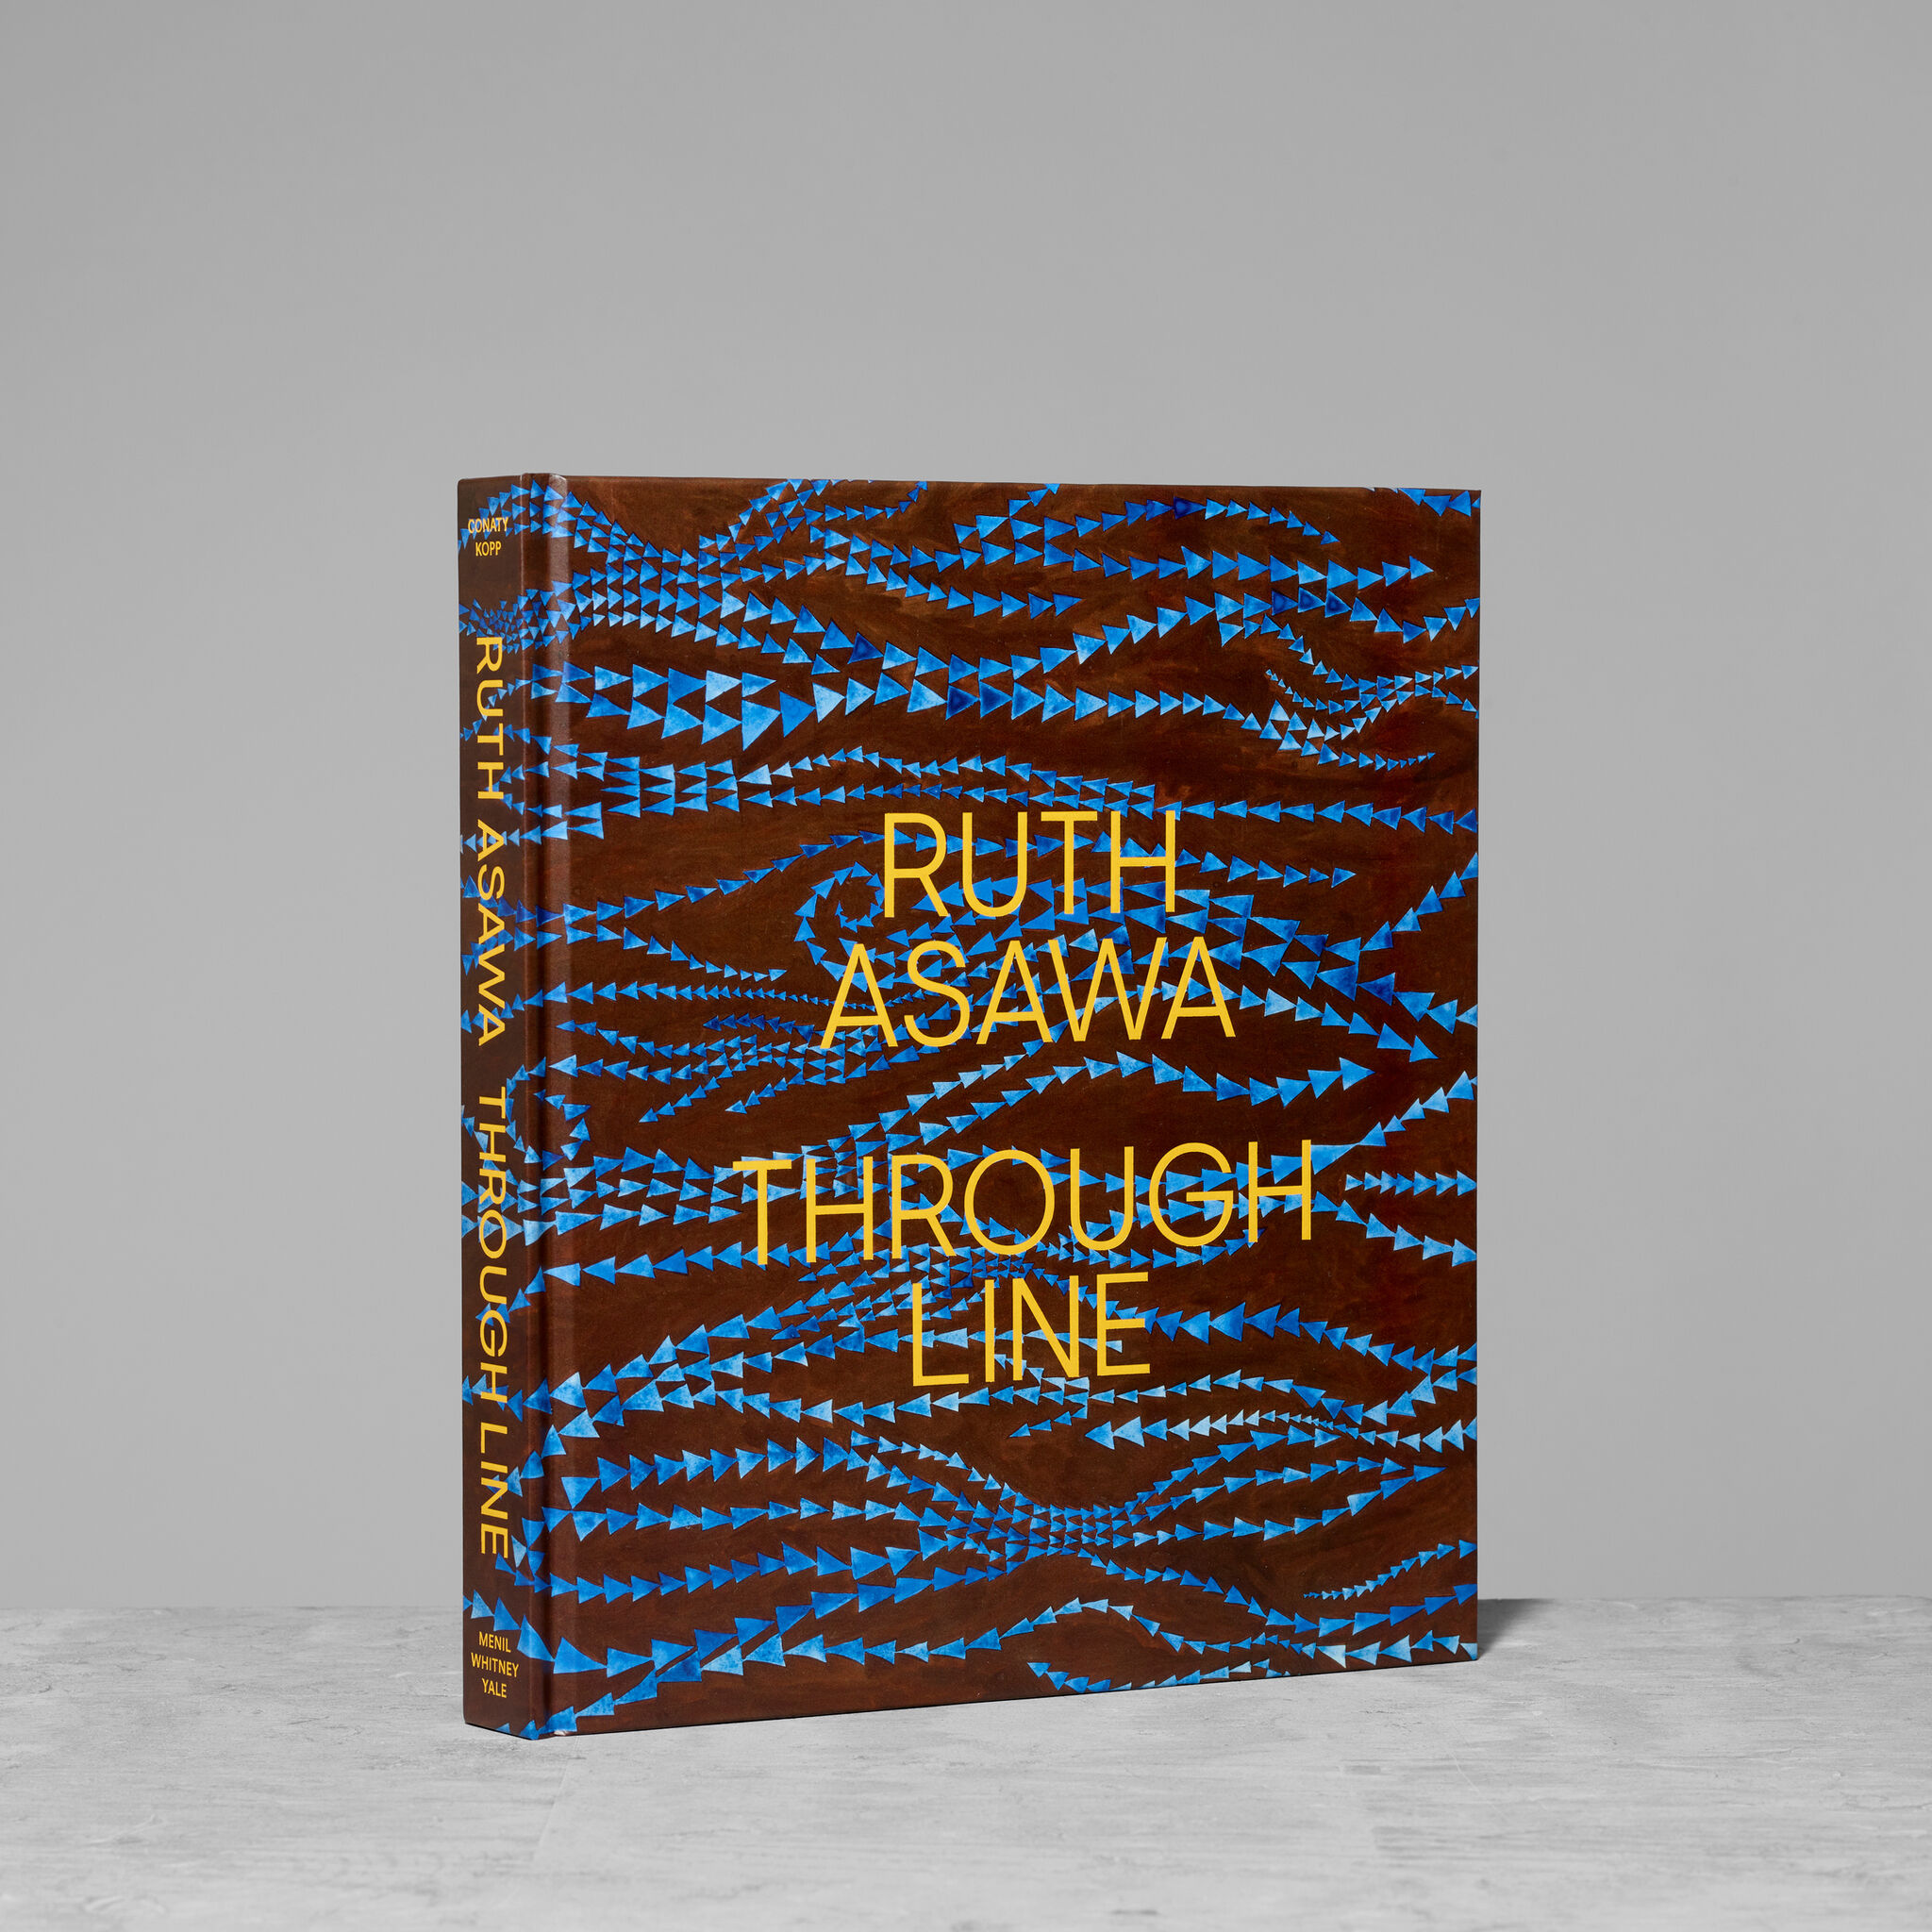 Image of the Ruth Asawa Through Line exhibition catalogue